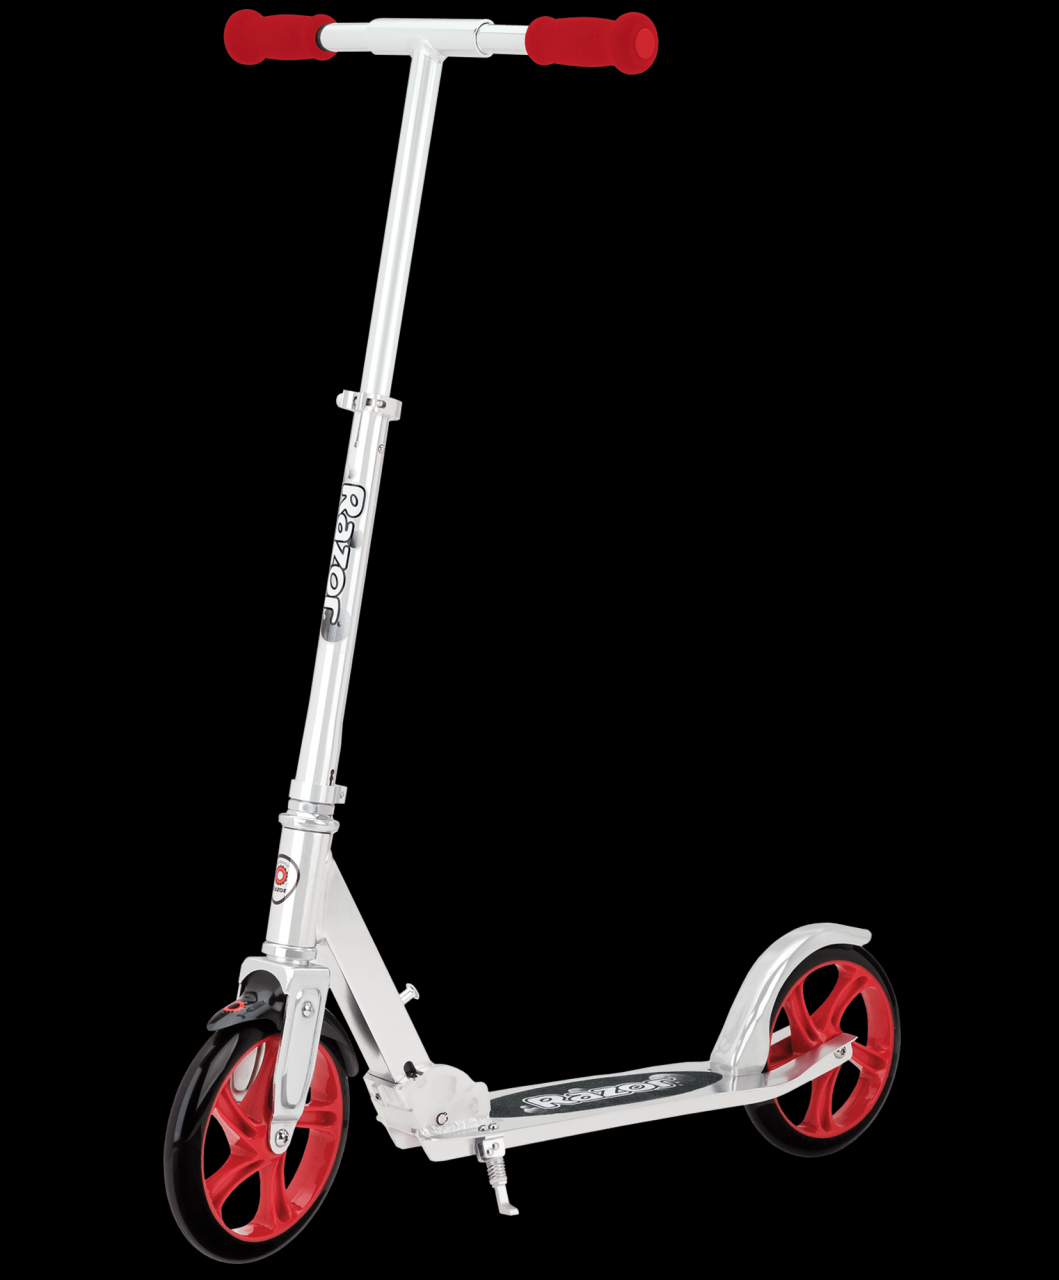 A5 Lux Scooter - Razor